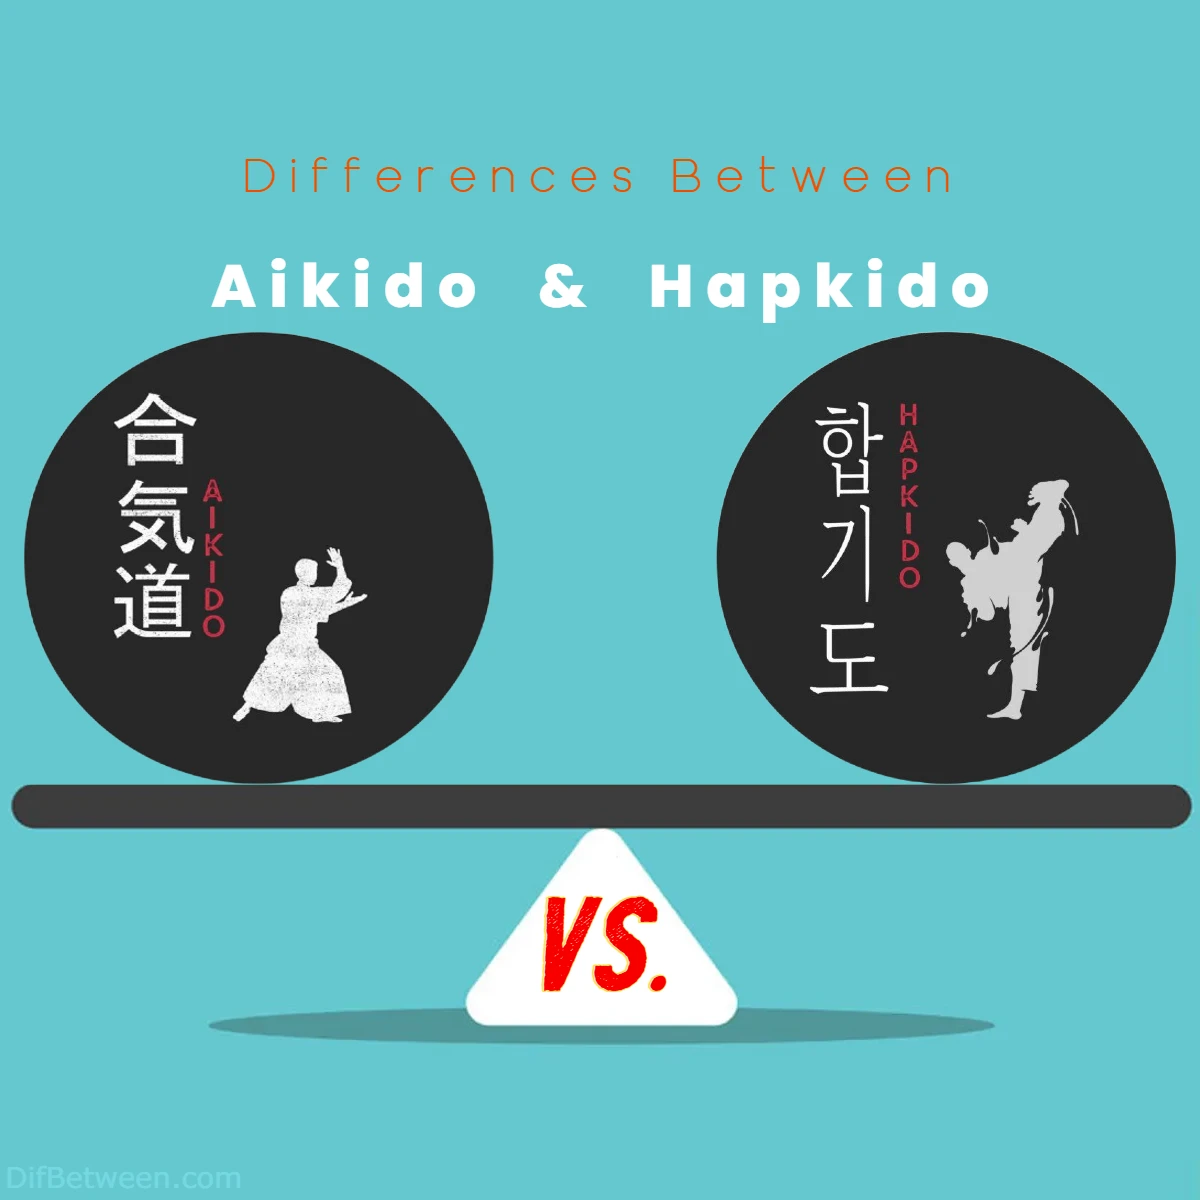 Differences Between Aikido vs Hapkido